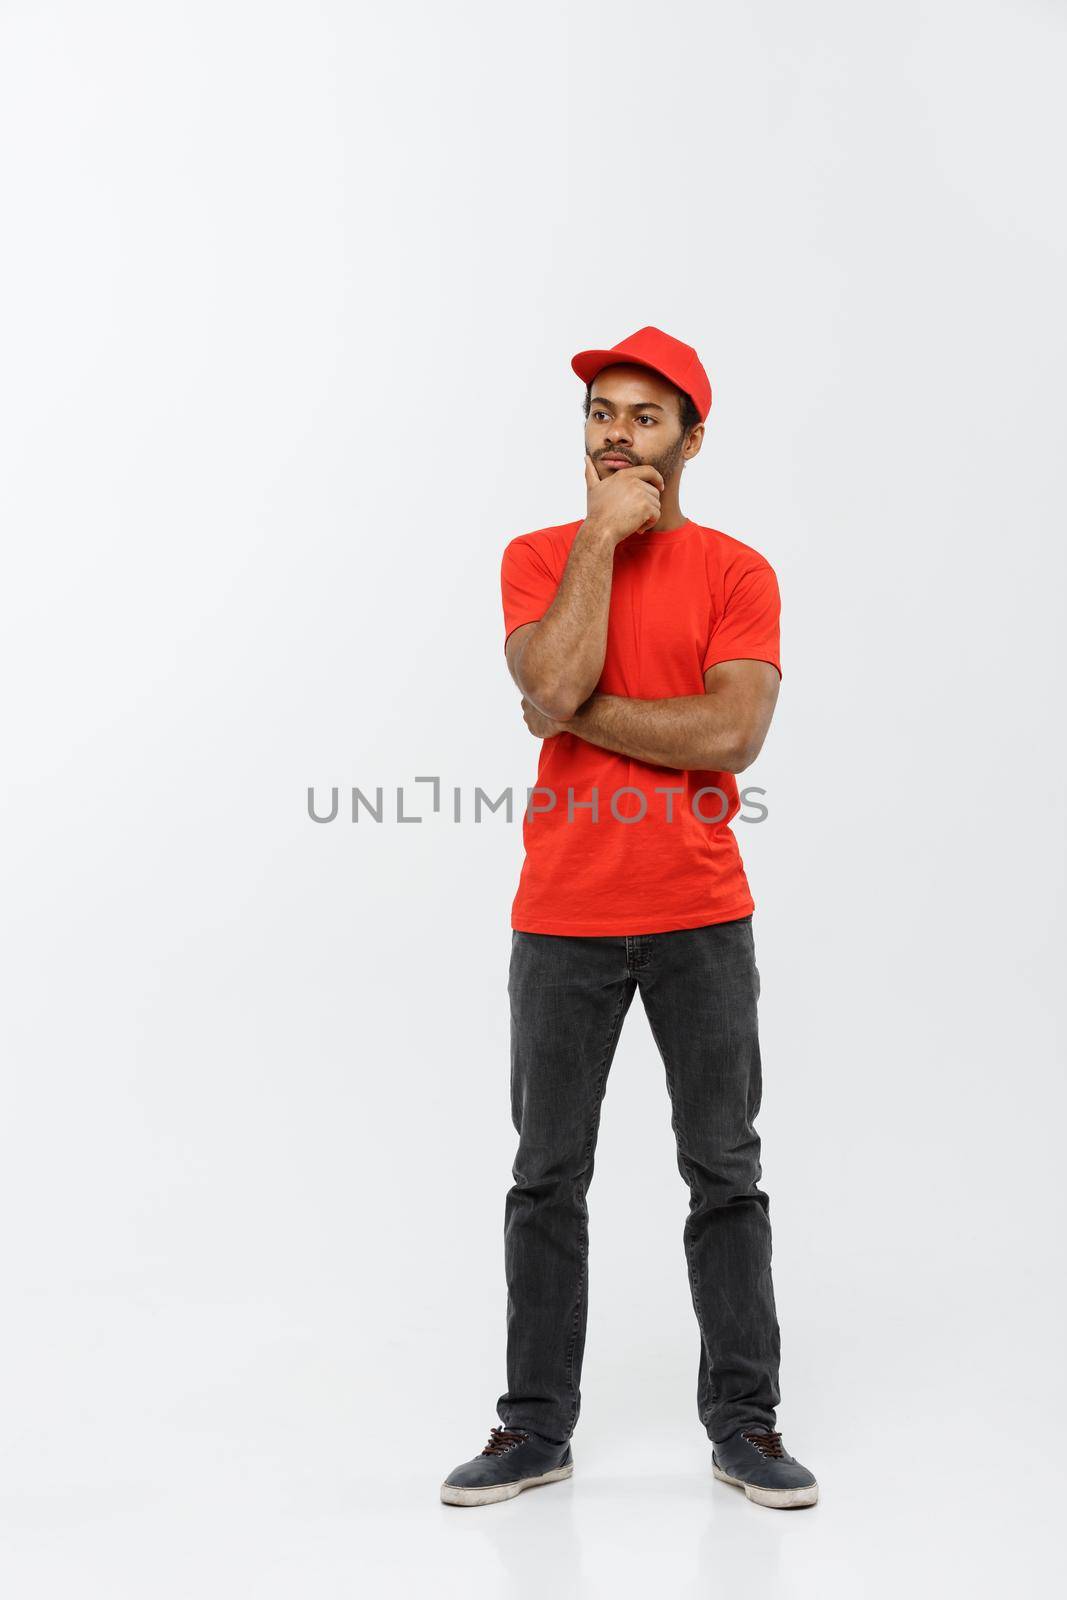 Delivery Concept - Handsome African American delivery man serious thinking of something. Isolated on Grey studio Background. Copy Space